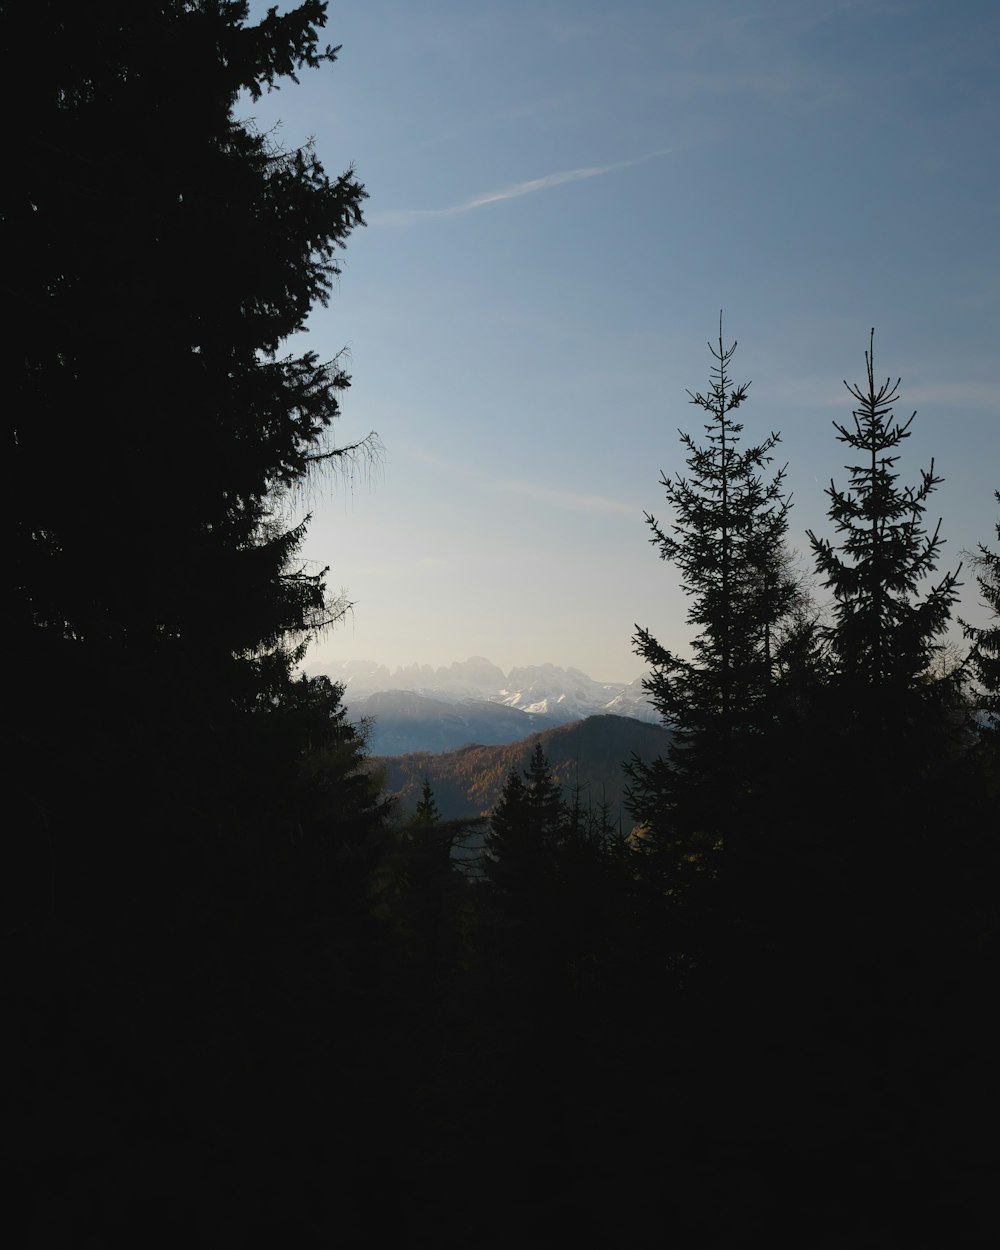 the silhouette of trees against a blue sky with mountains in the distance